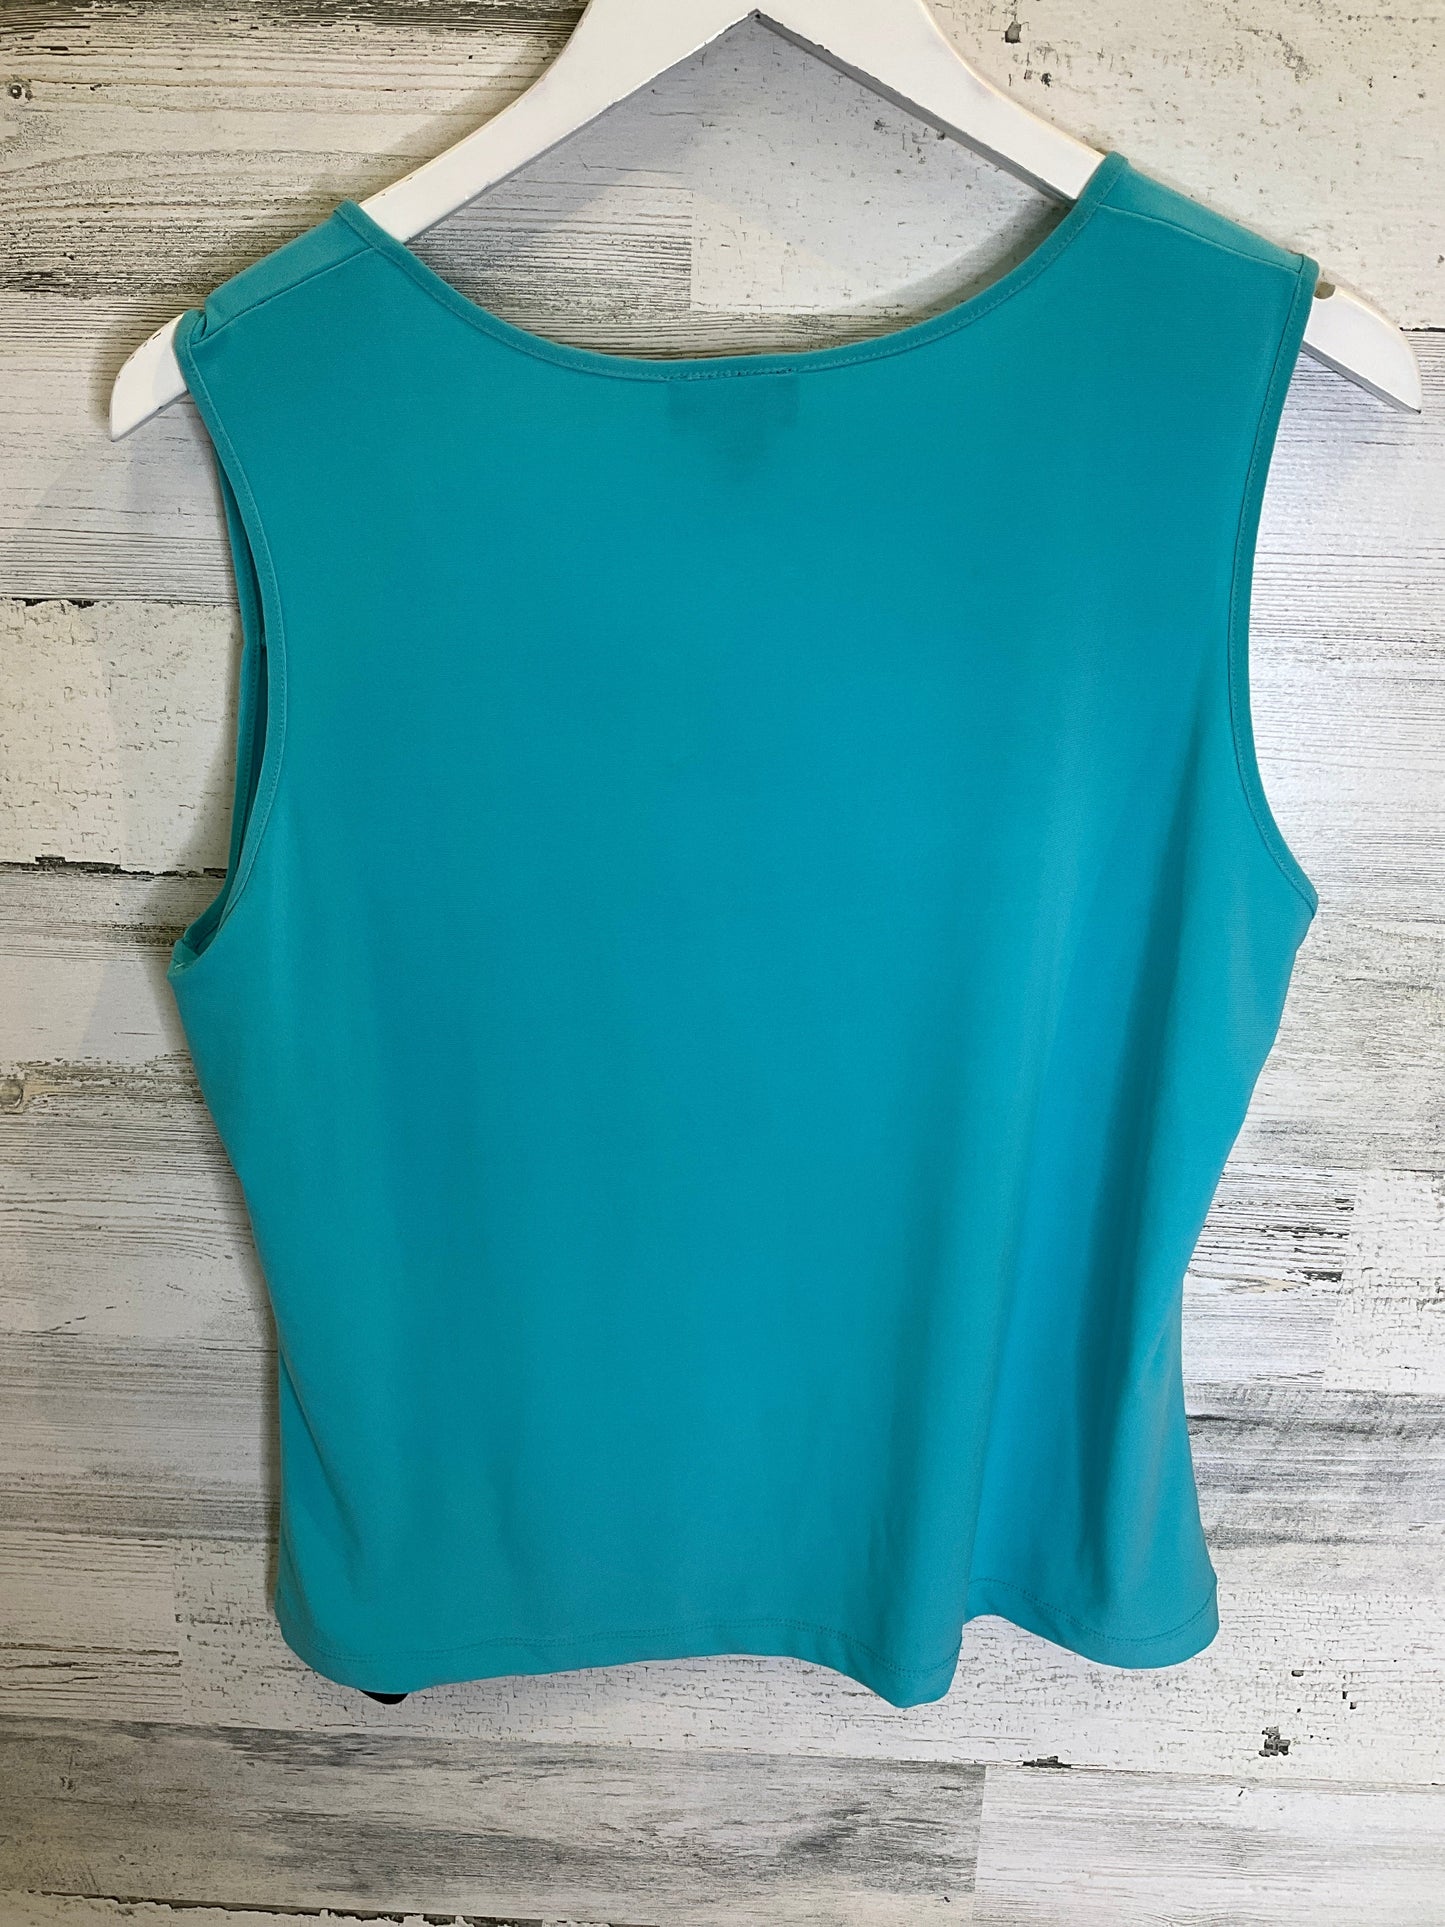 Blue Top Sleeveless Clothes Mentor, Size L